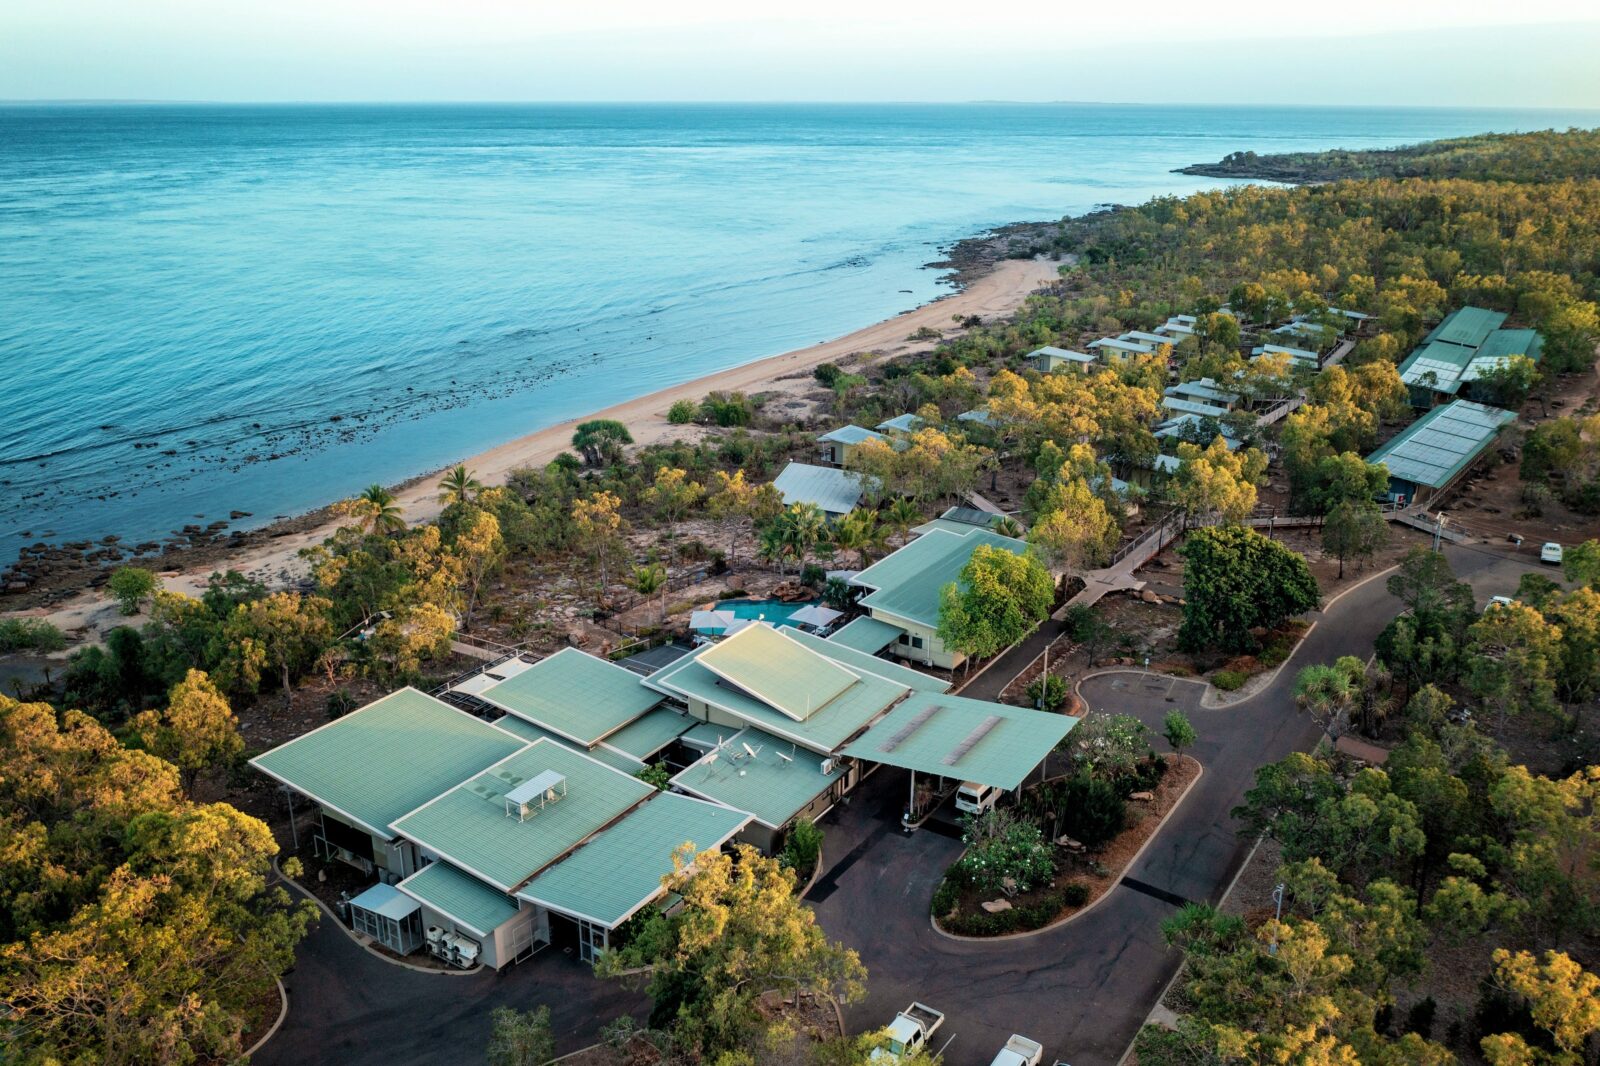 An arial view of the Groote Eylandt Lodge.